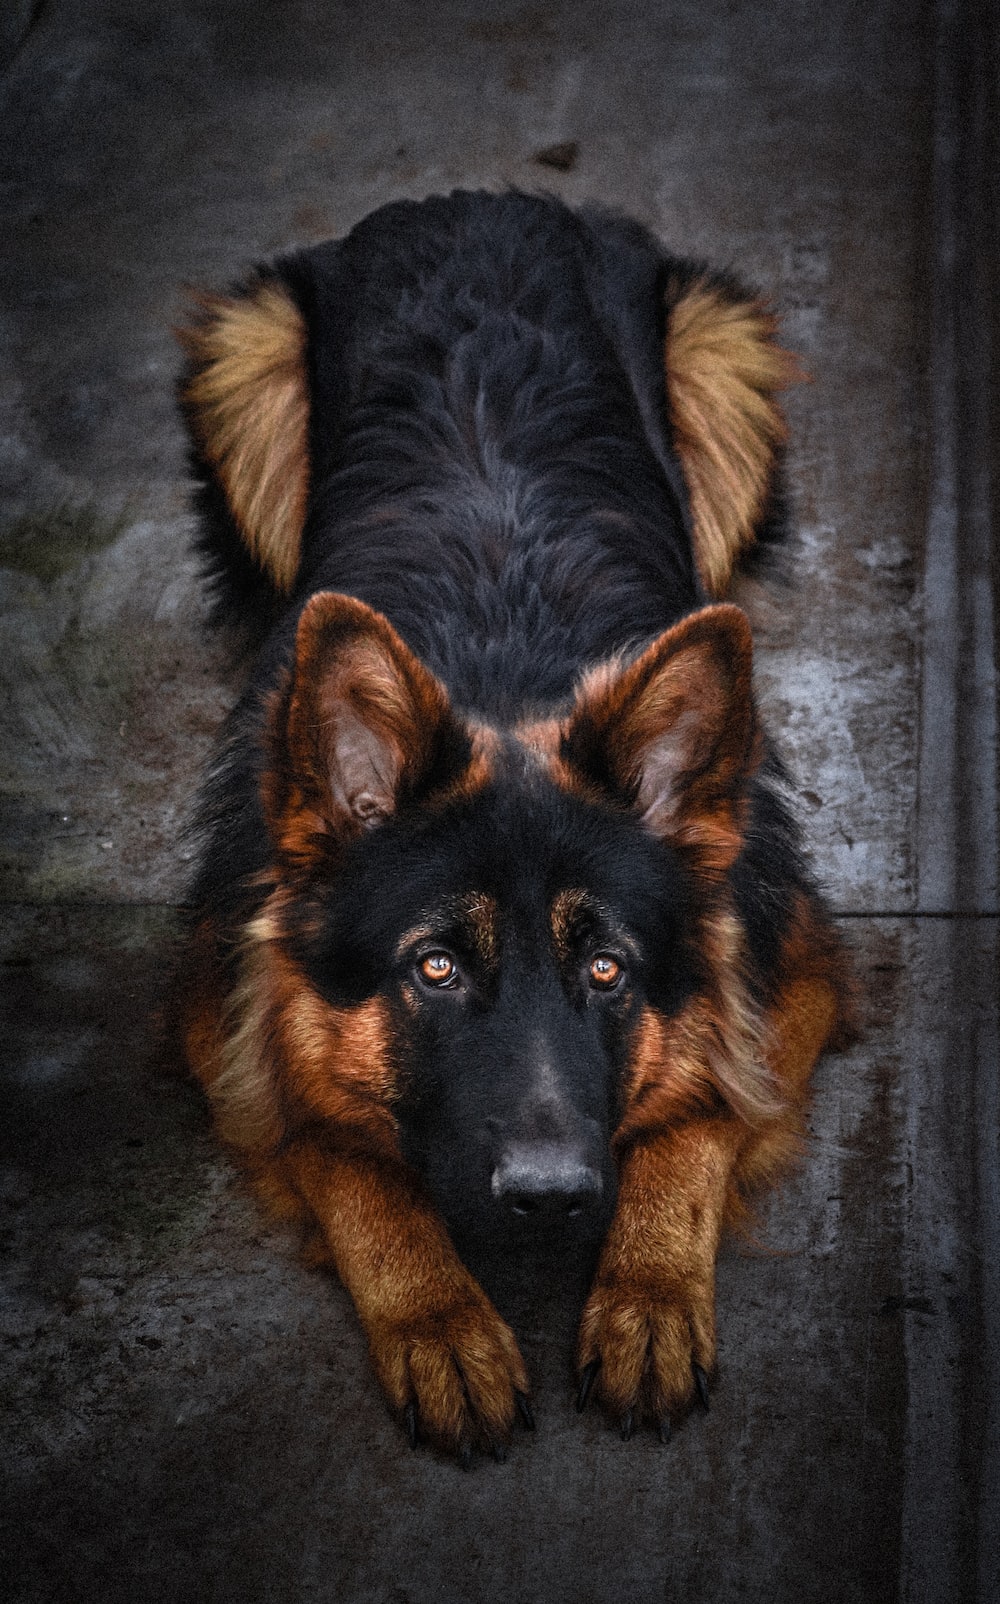 German shepherd dog pictures hd download free images on